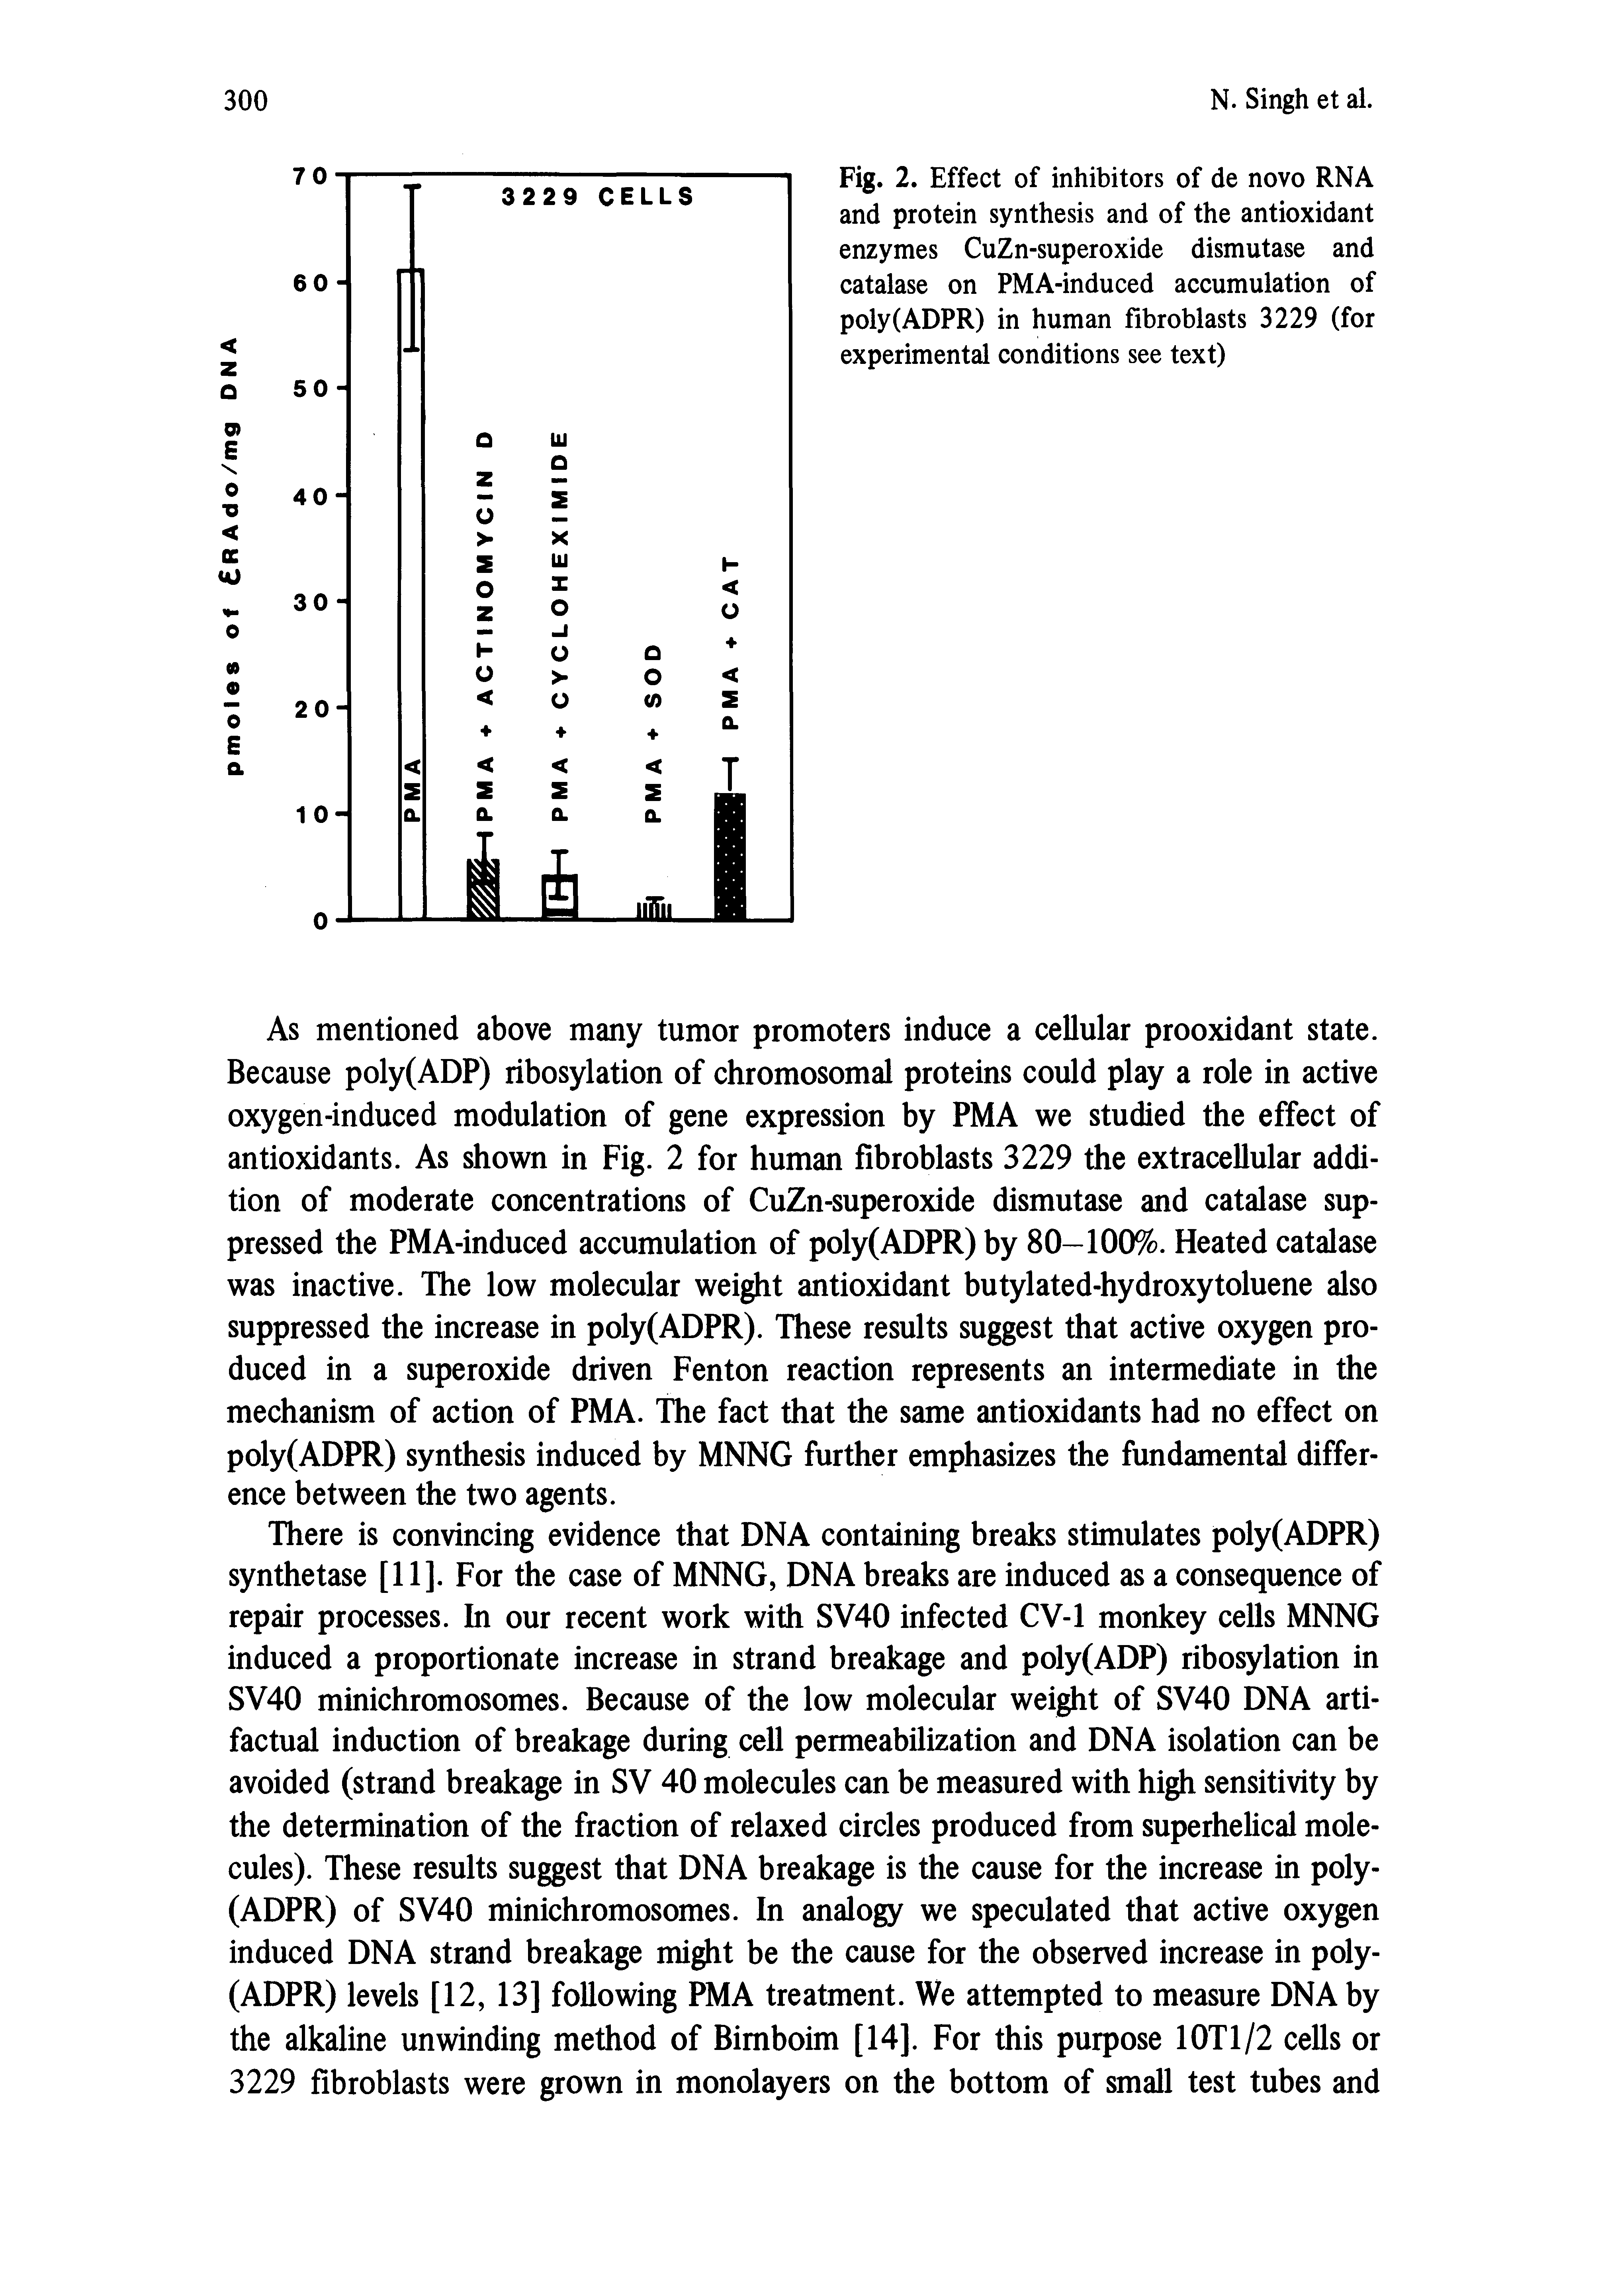 Fig. 2. Effect of inhibitors of de novo RNA and protein synthesis and of the antioxidant enzymes CuZn-superoxide dismutase and catalase on PMA-induced accumulation of poly(ADPR) in human fibroblasts 3229 (for experimental conditions see text)...